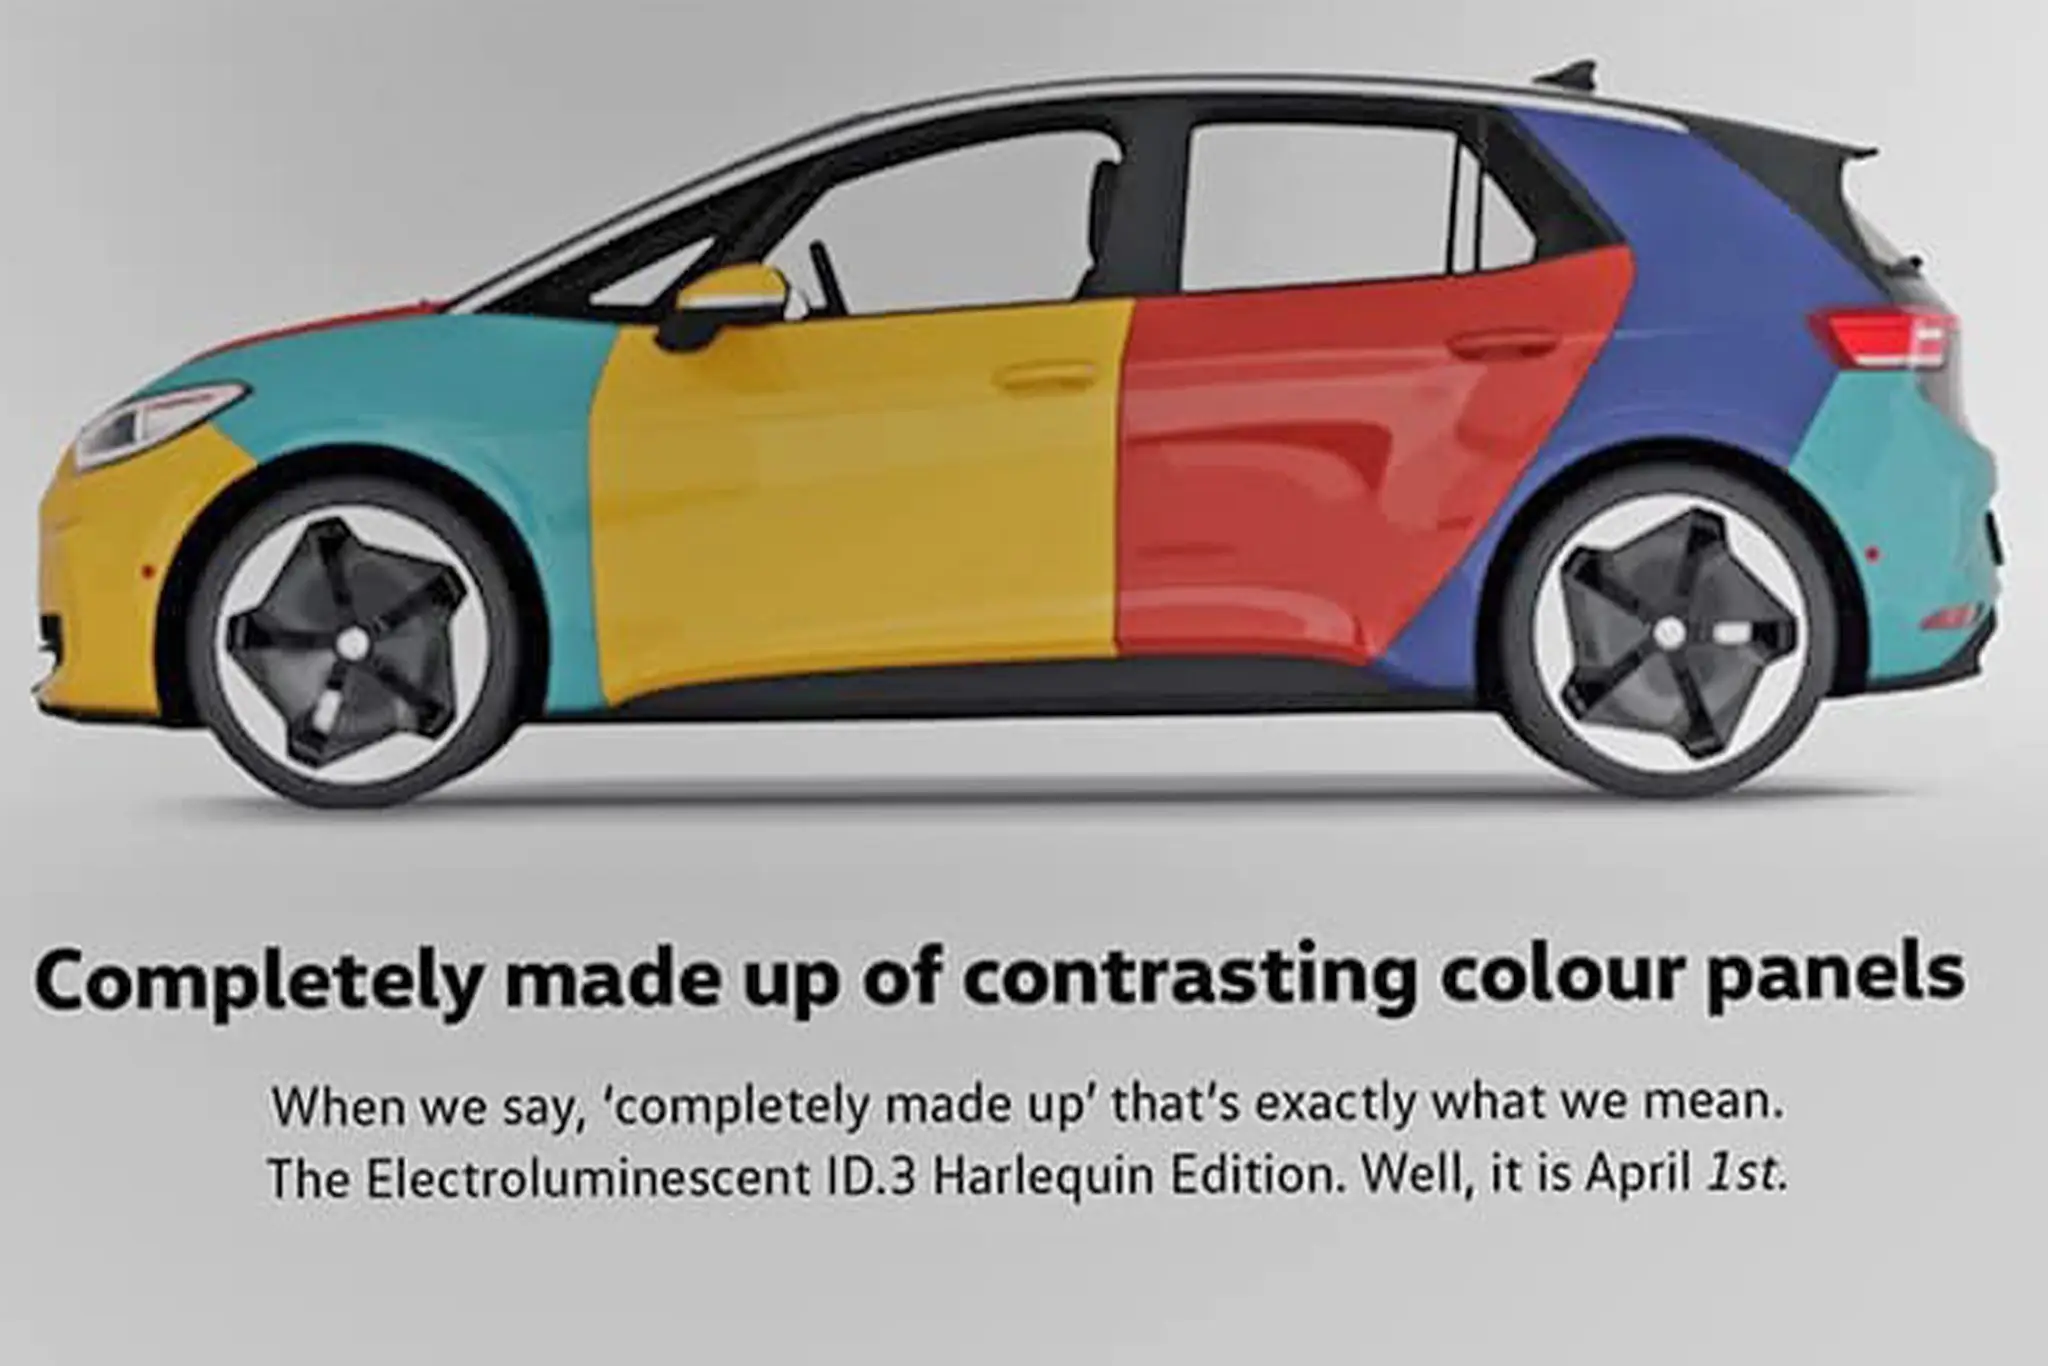 VW Teases Harlequin Edition ID.3 for April Fools' Day | THE SHOP